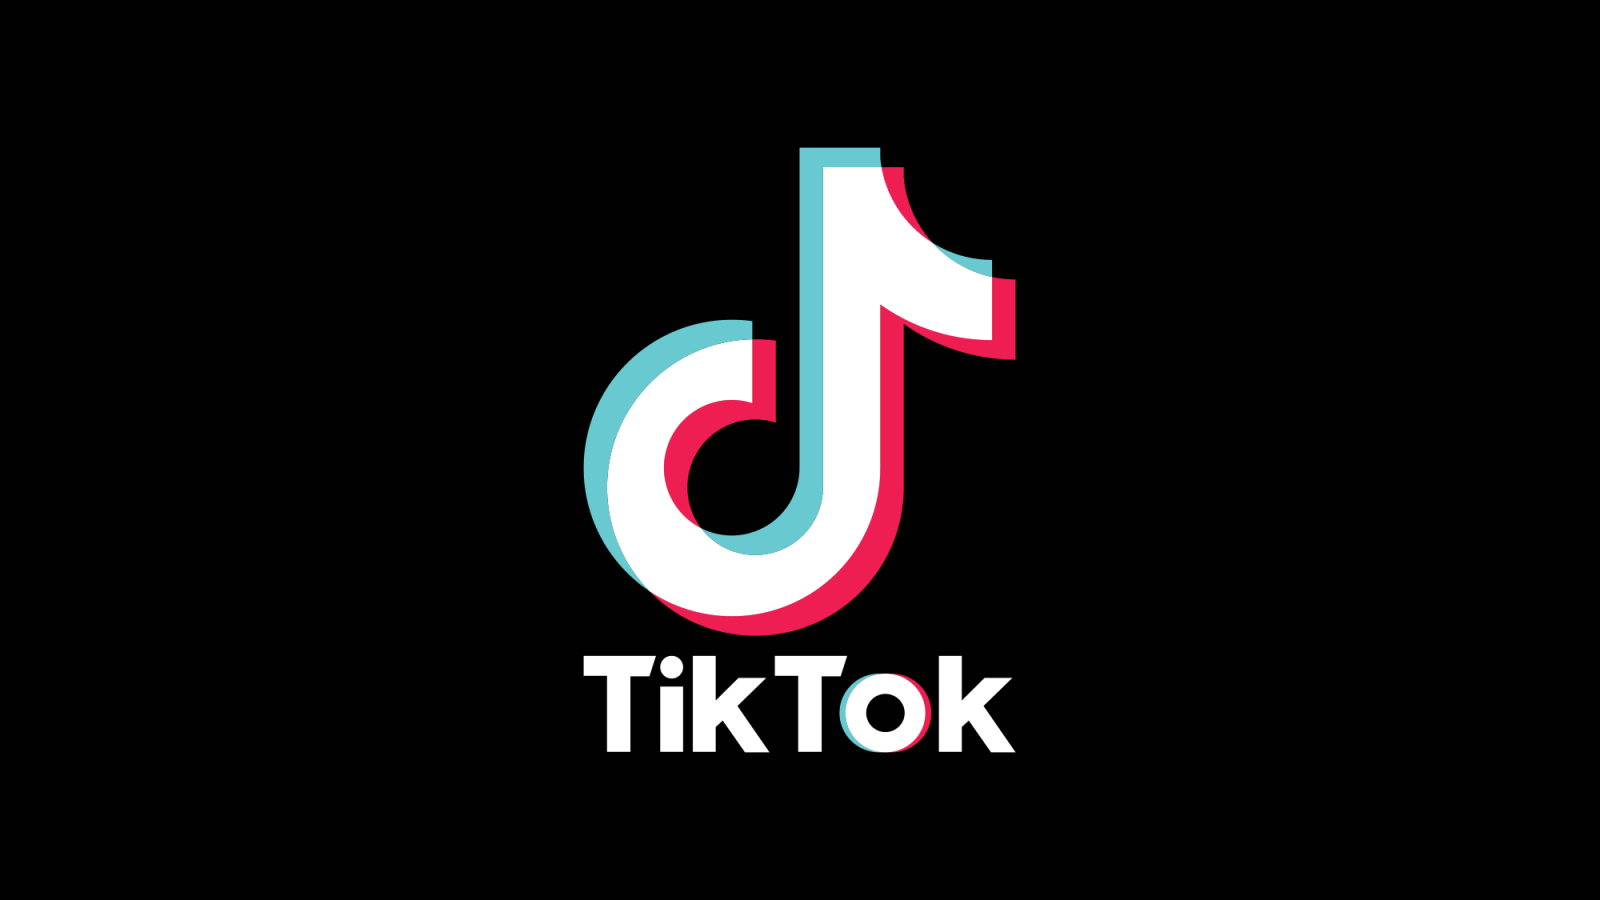 TikTok Says Some China-Based Employees Can Access U.S. User Data, Outlines Plan for Better Safeguards